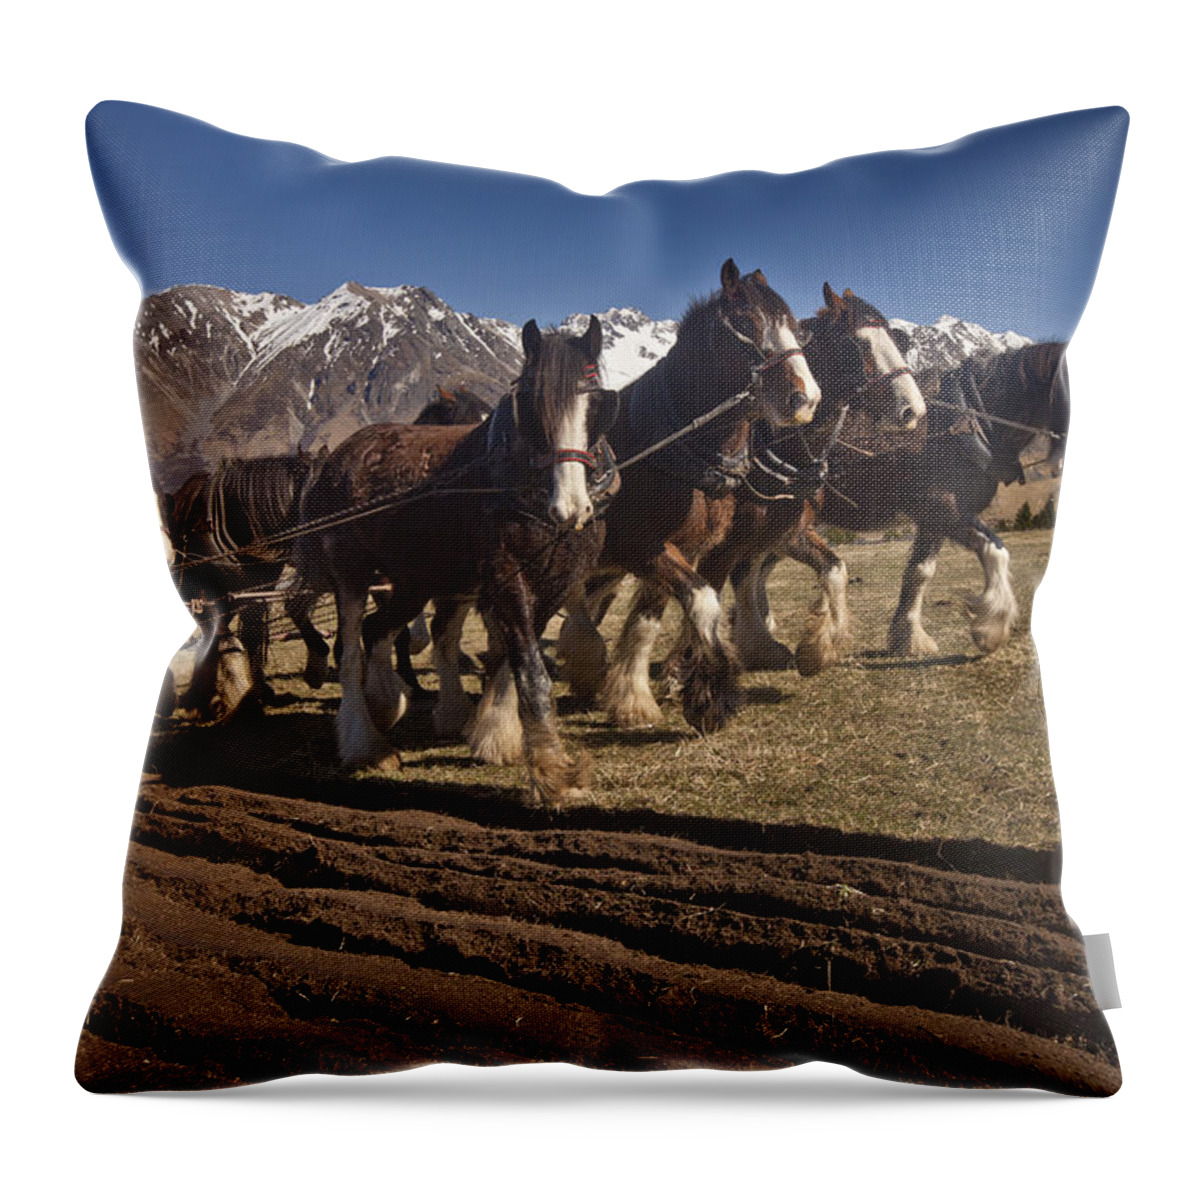 00475843 Throw Pillow featuring the photograph Clydesdale Ploughing Field In Erewhon by Colin Monteath